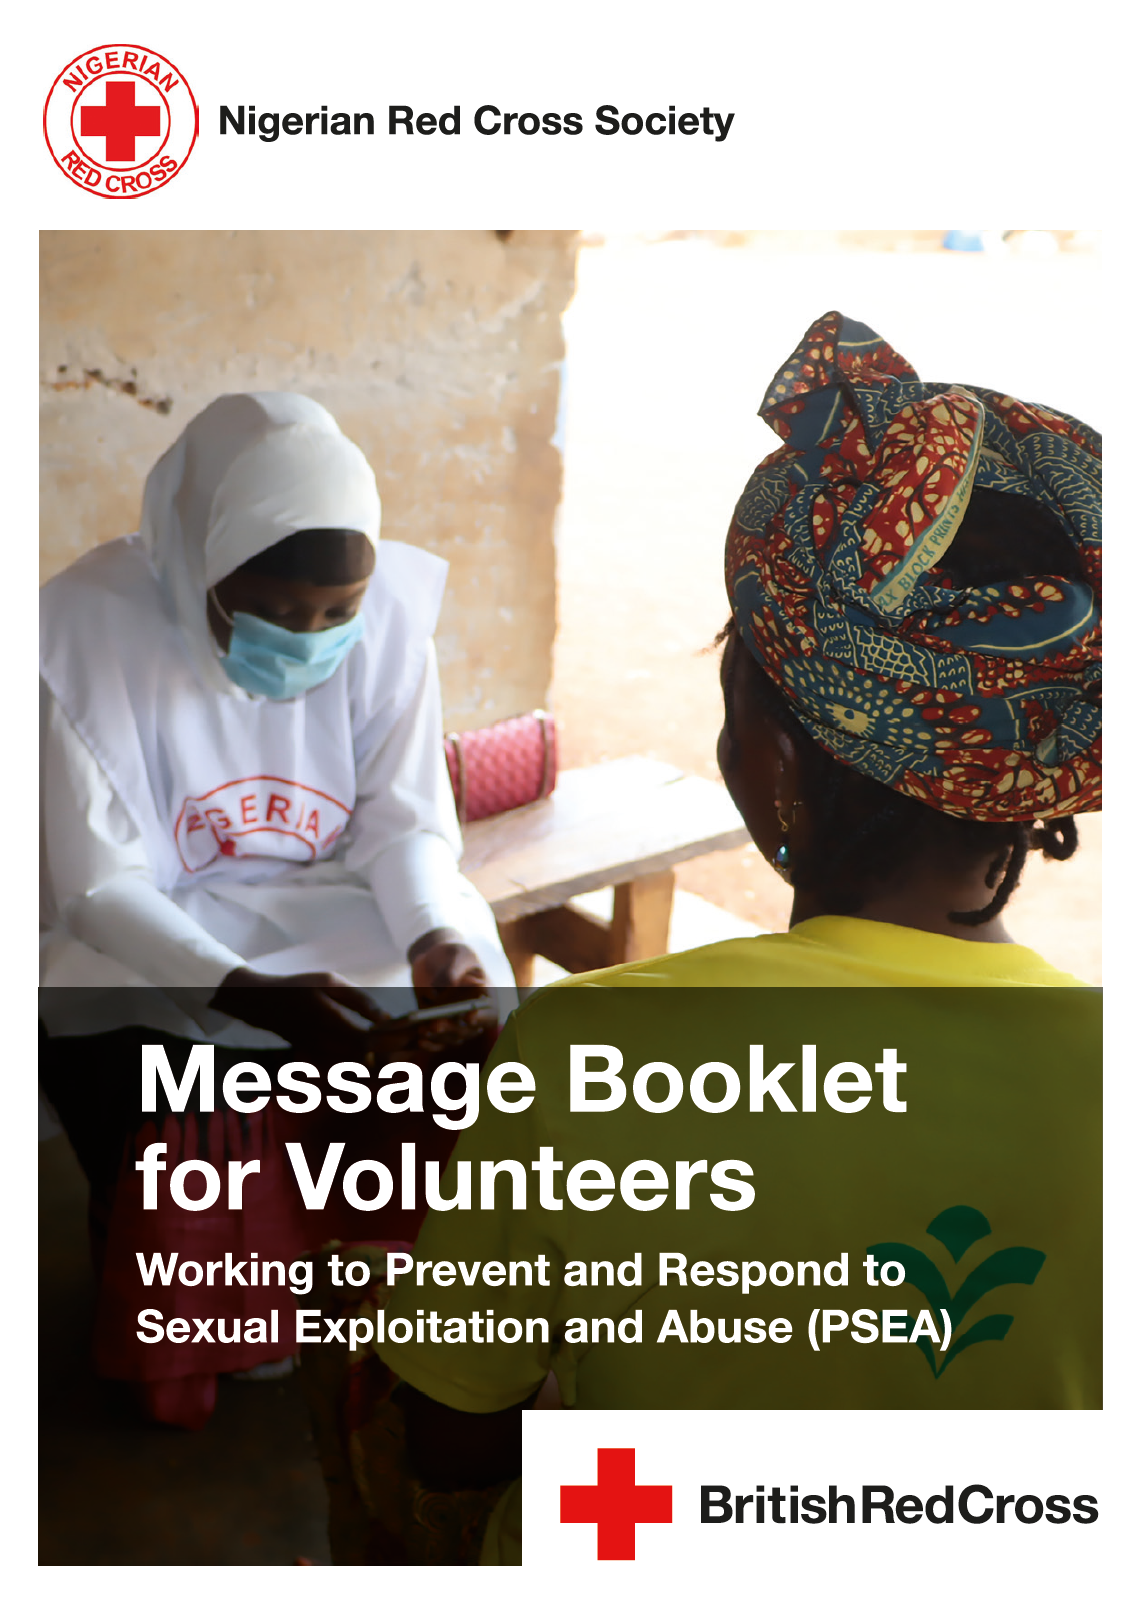 Cover image of PSEA message booklet for volunteers